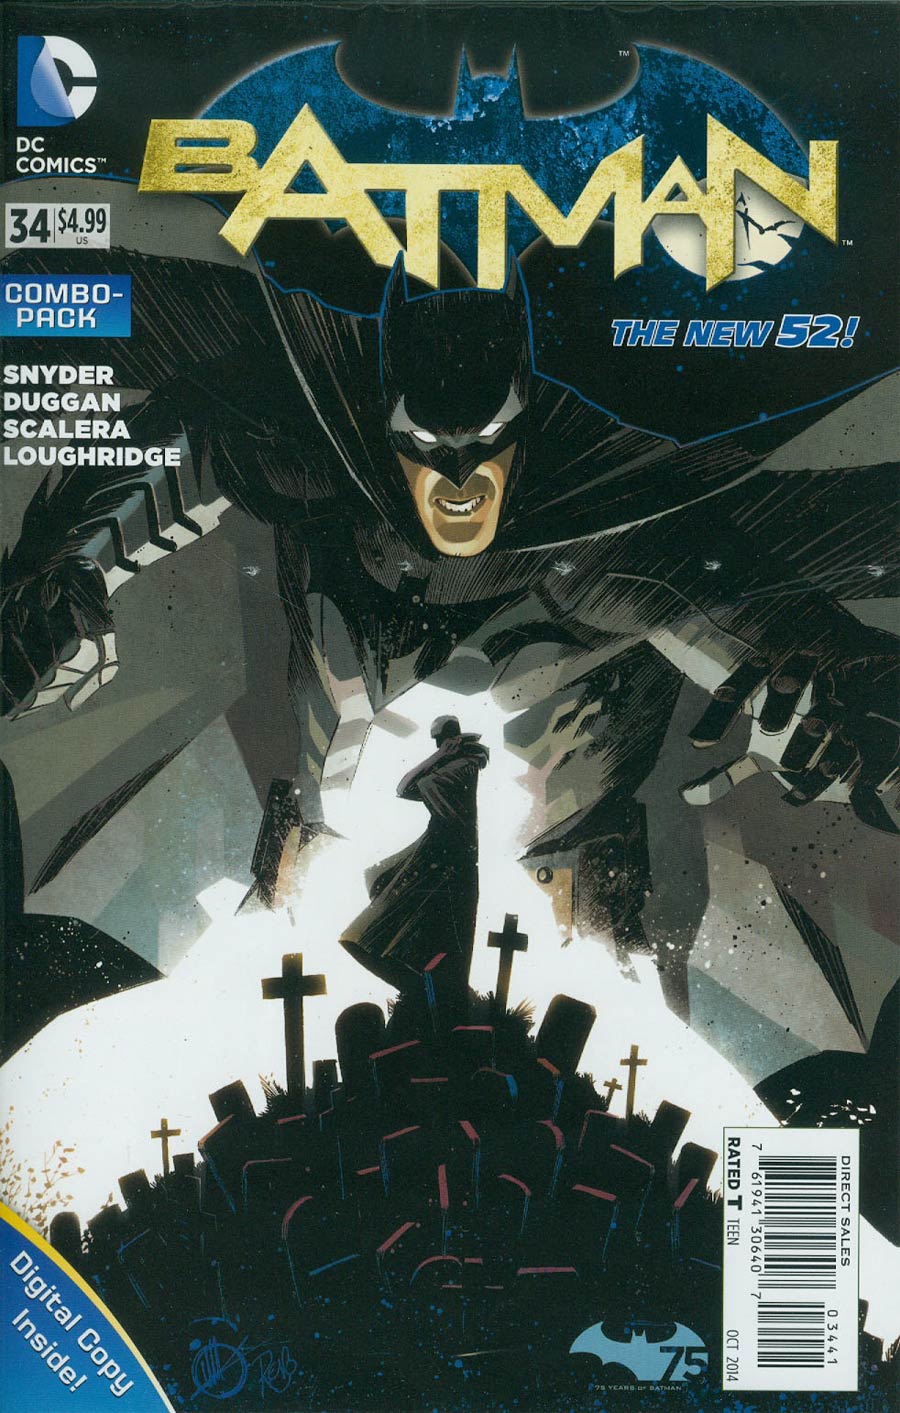 Batman Vol 2 #34 Cover D Combo Pack Without Polybag